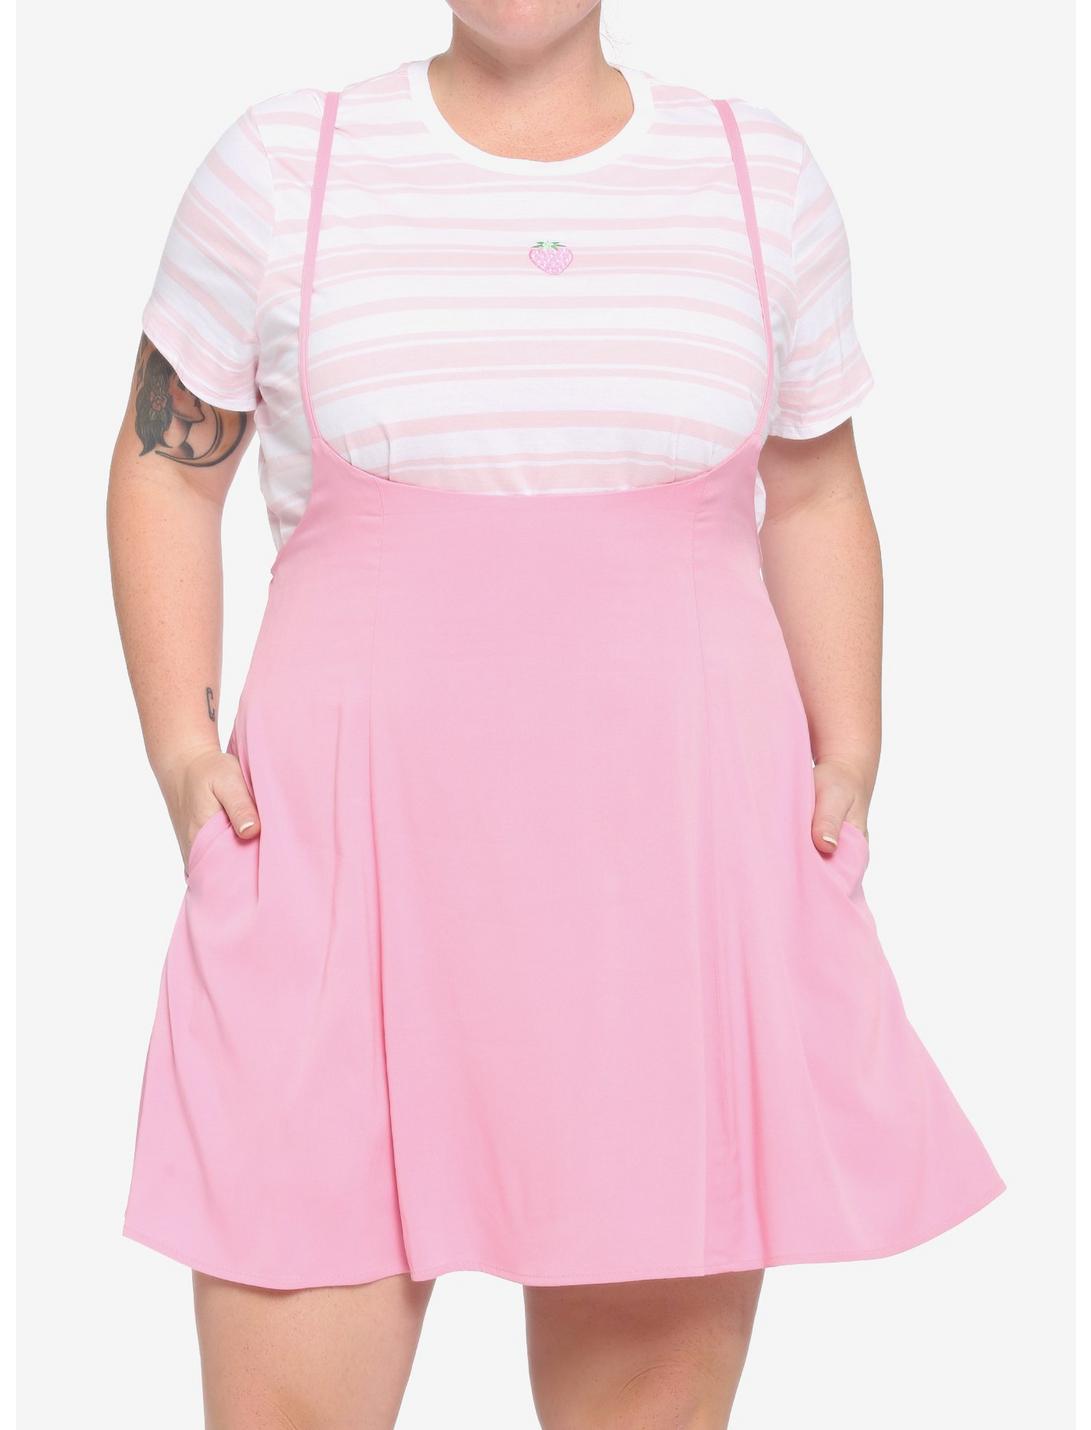 Pink High-Waisted Spaghetti Strap Suspender Skirt Plus Size, PINK, hi-res